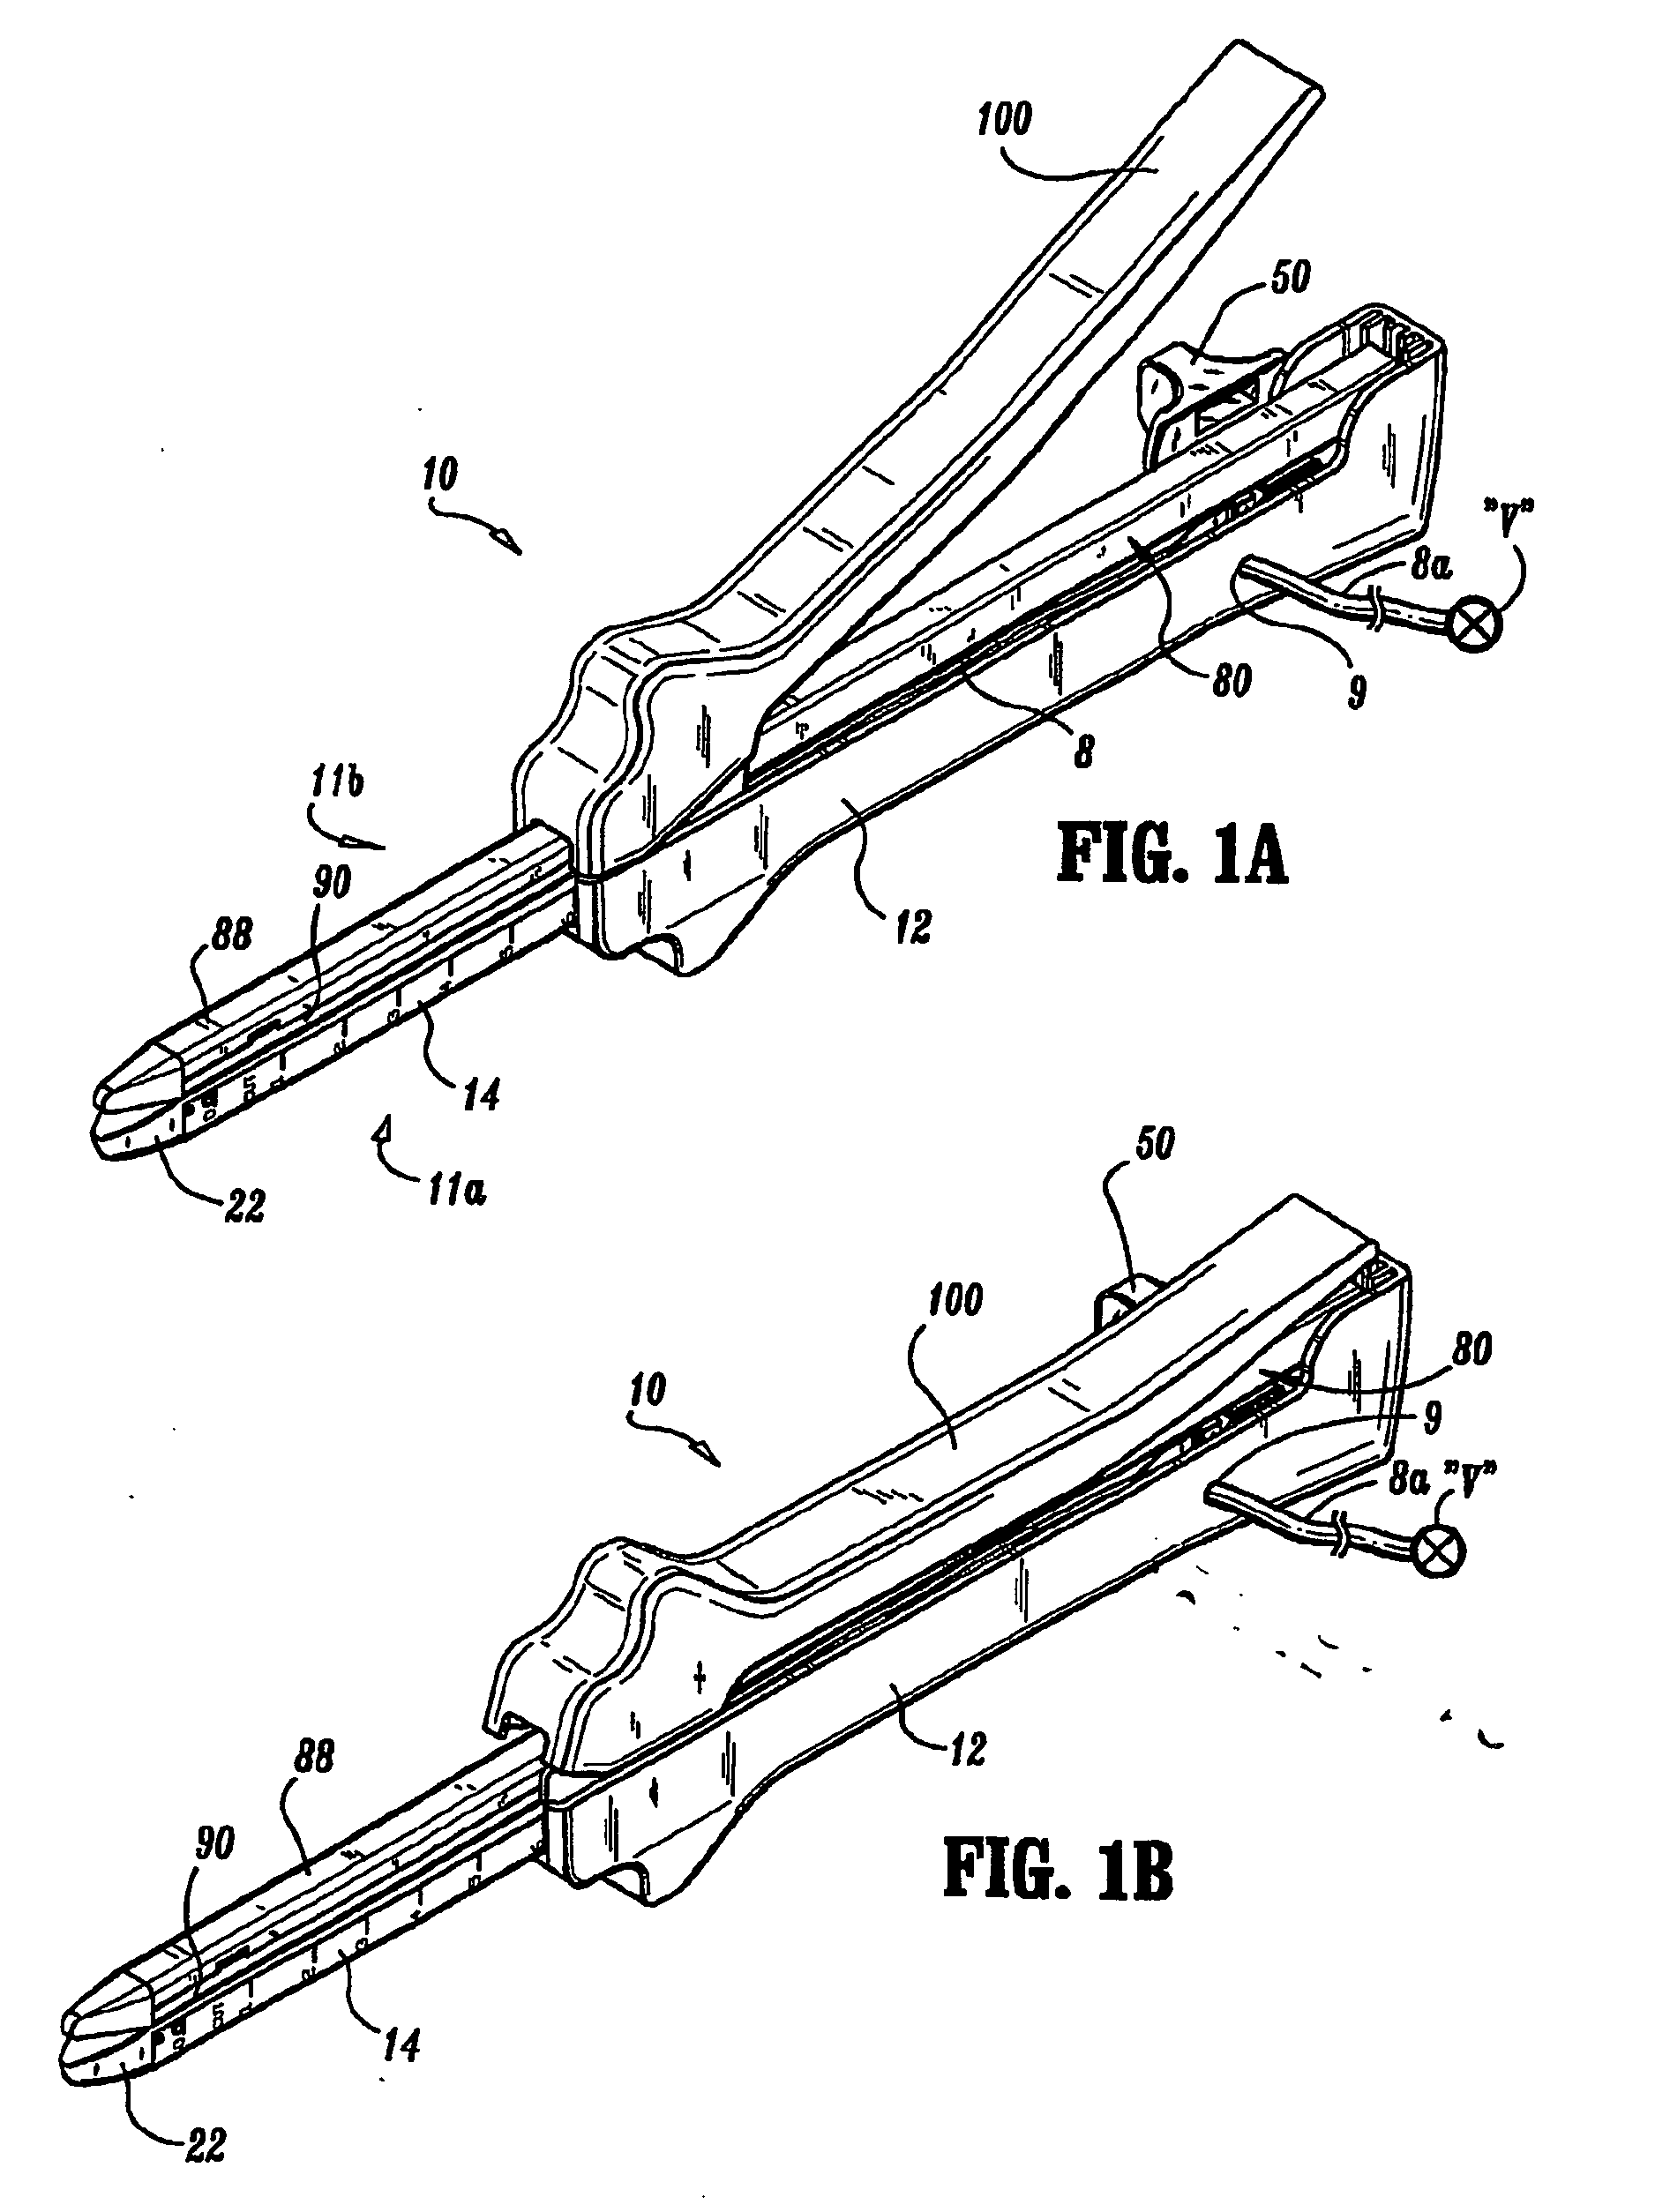 Surgical stapling apparatus having a wound closure material applicator assembly